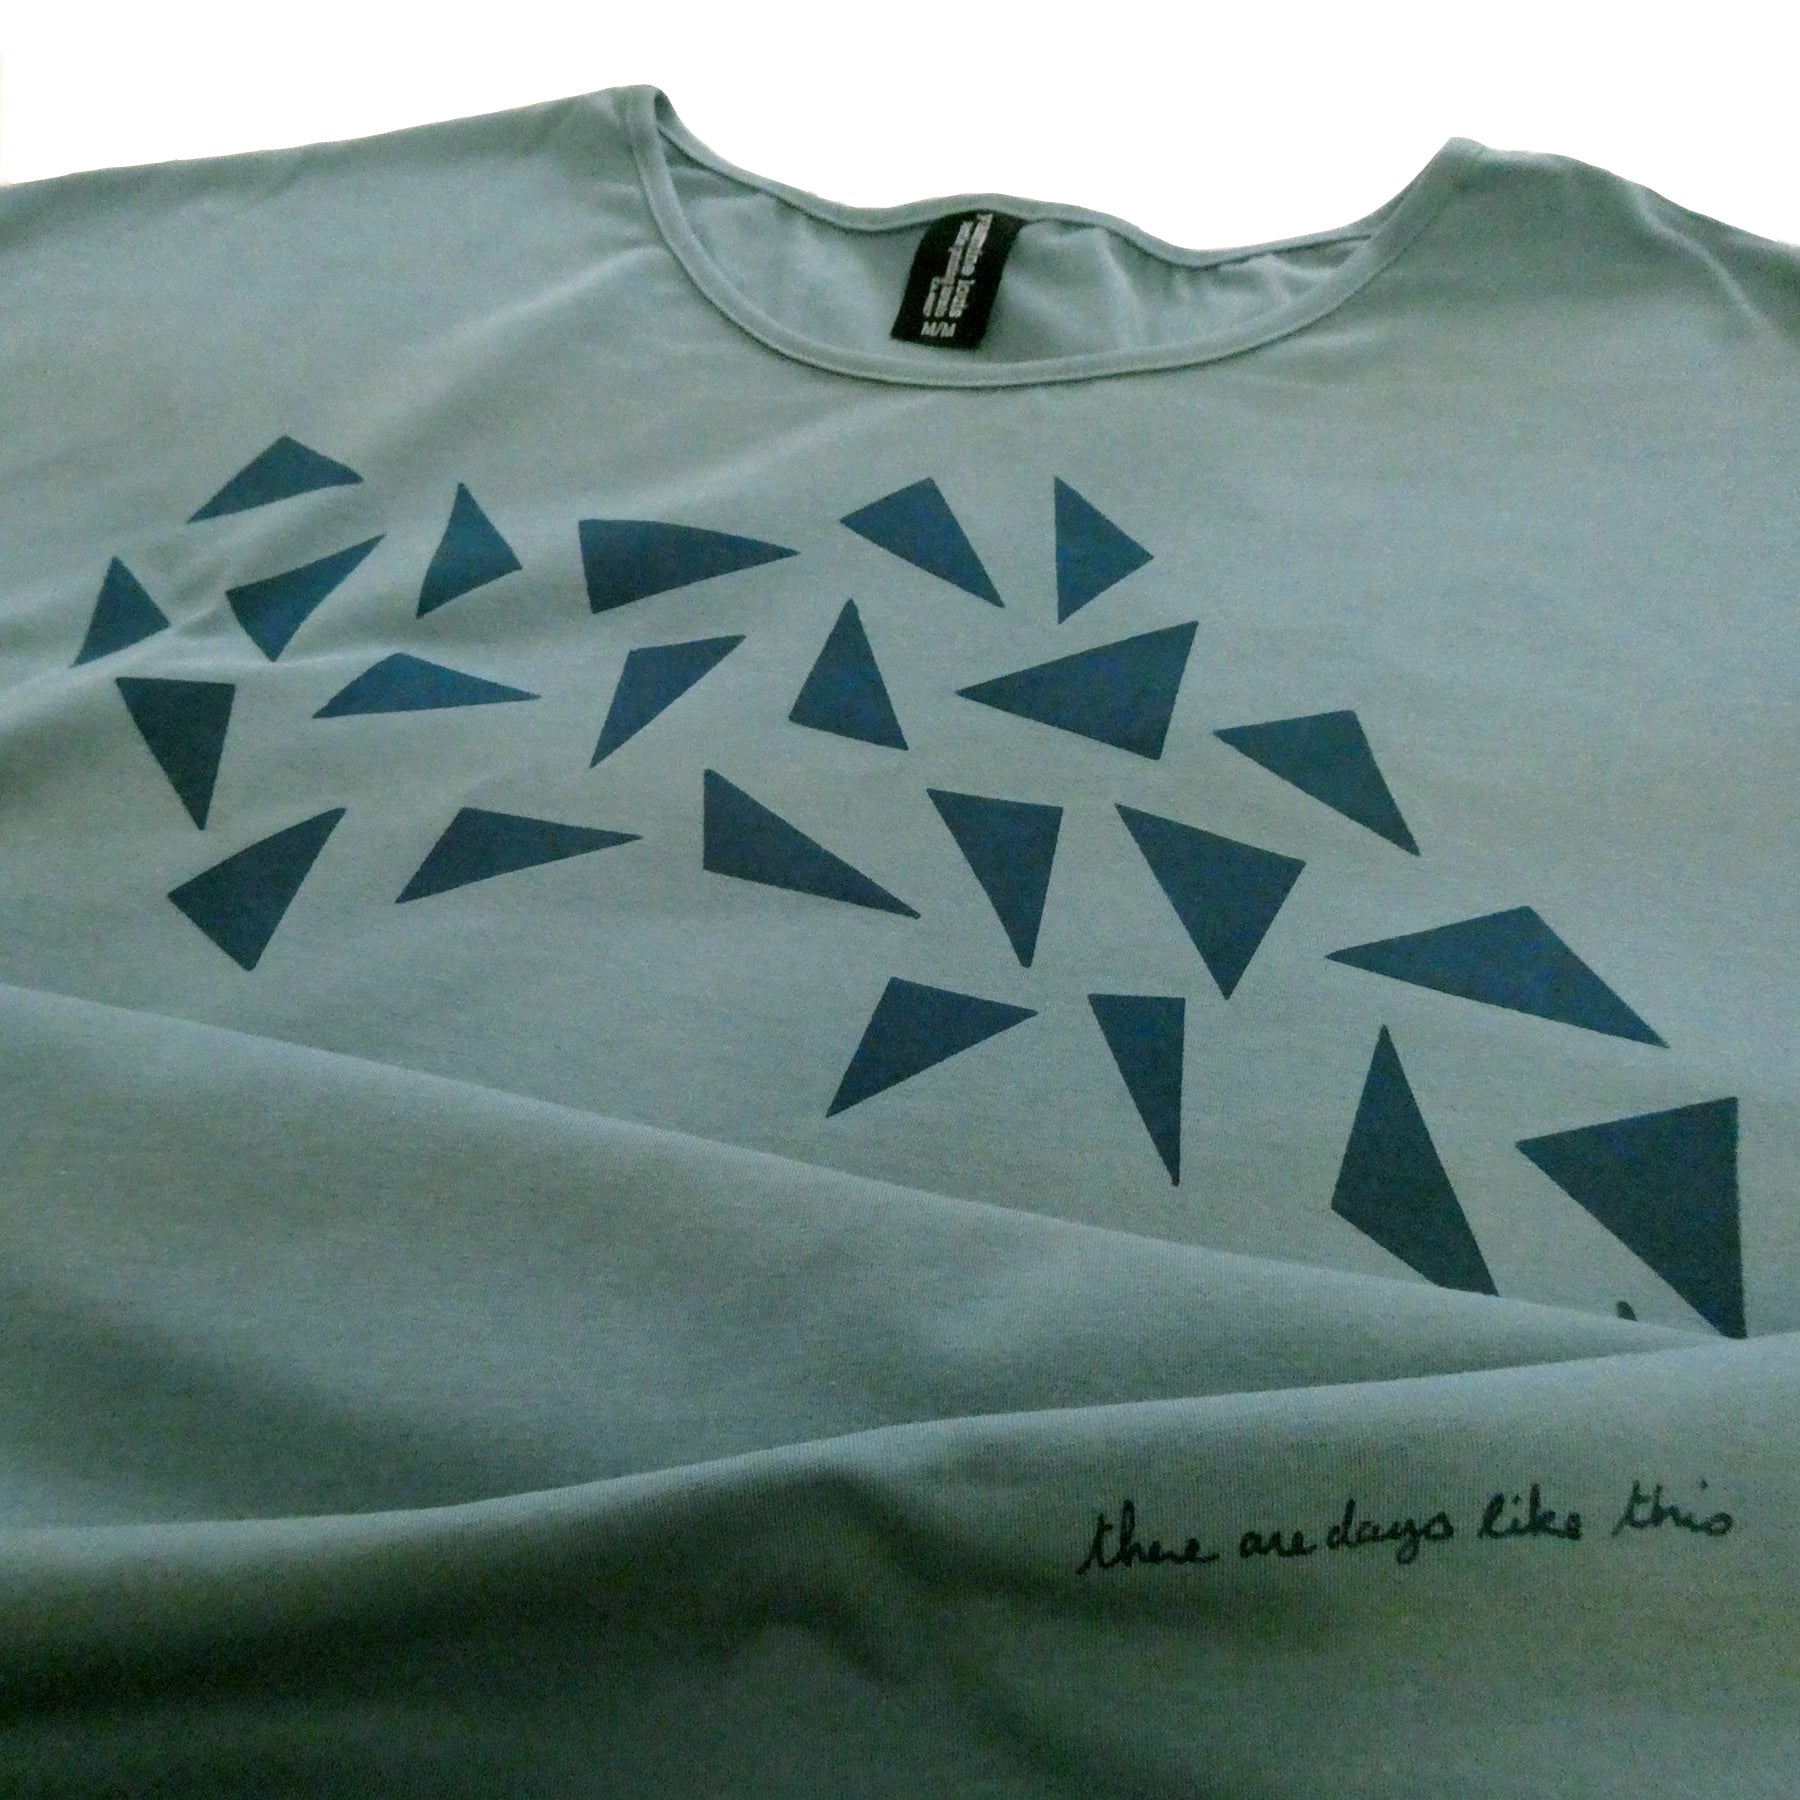 there are days like this (24 triangles / 24 hours) (only XL left)